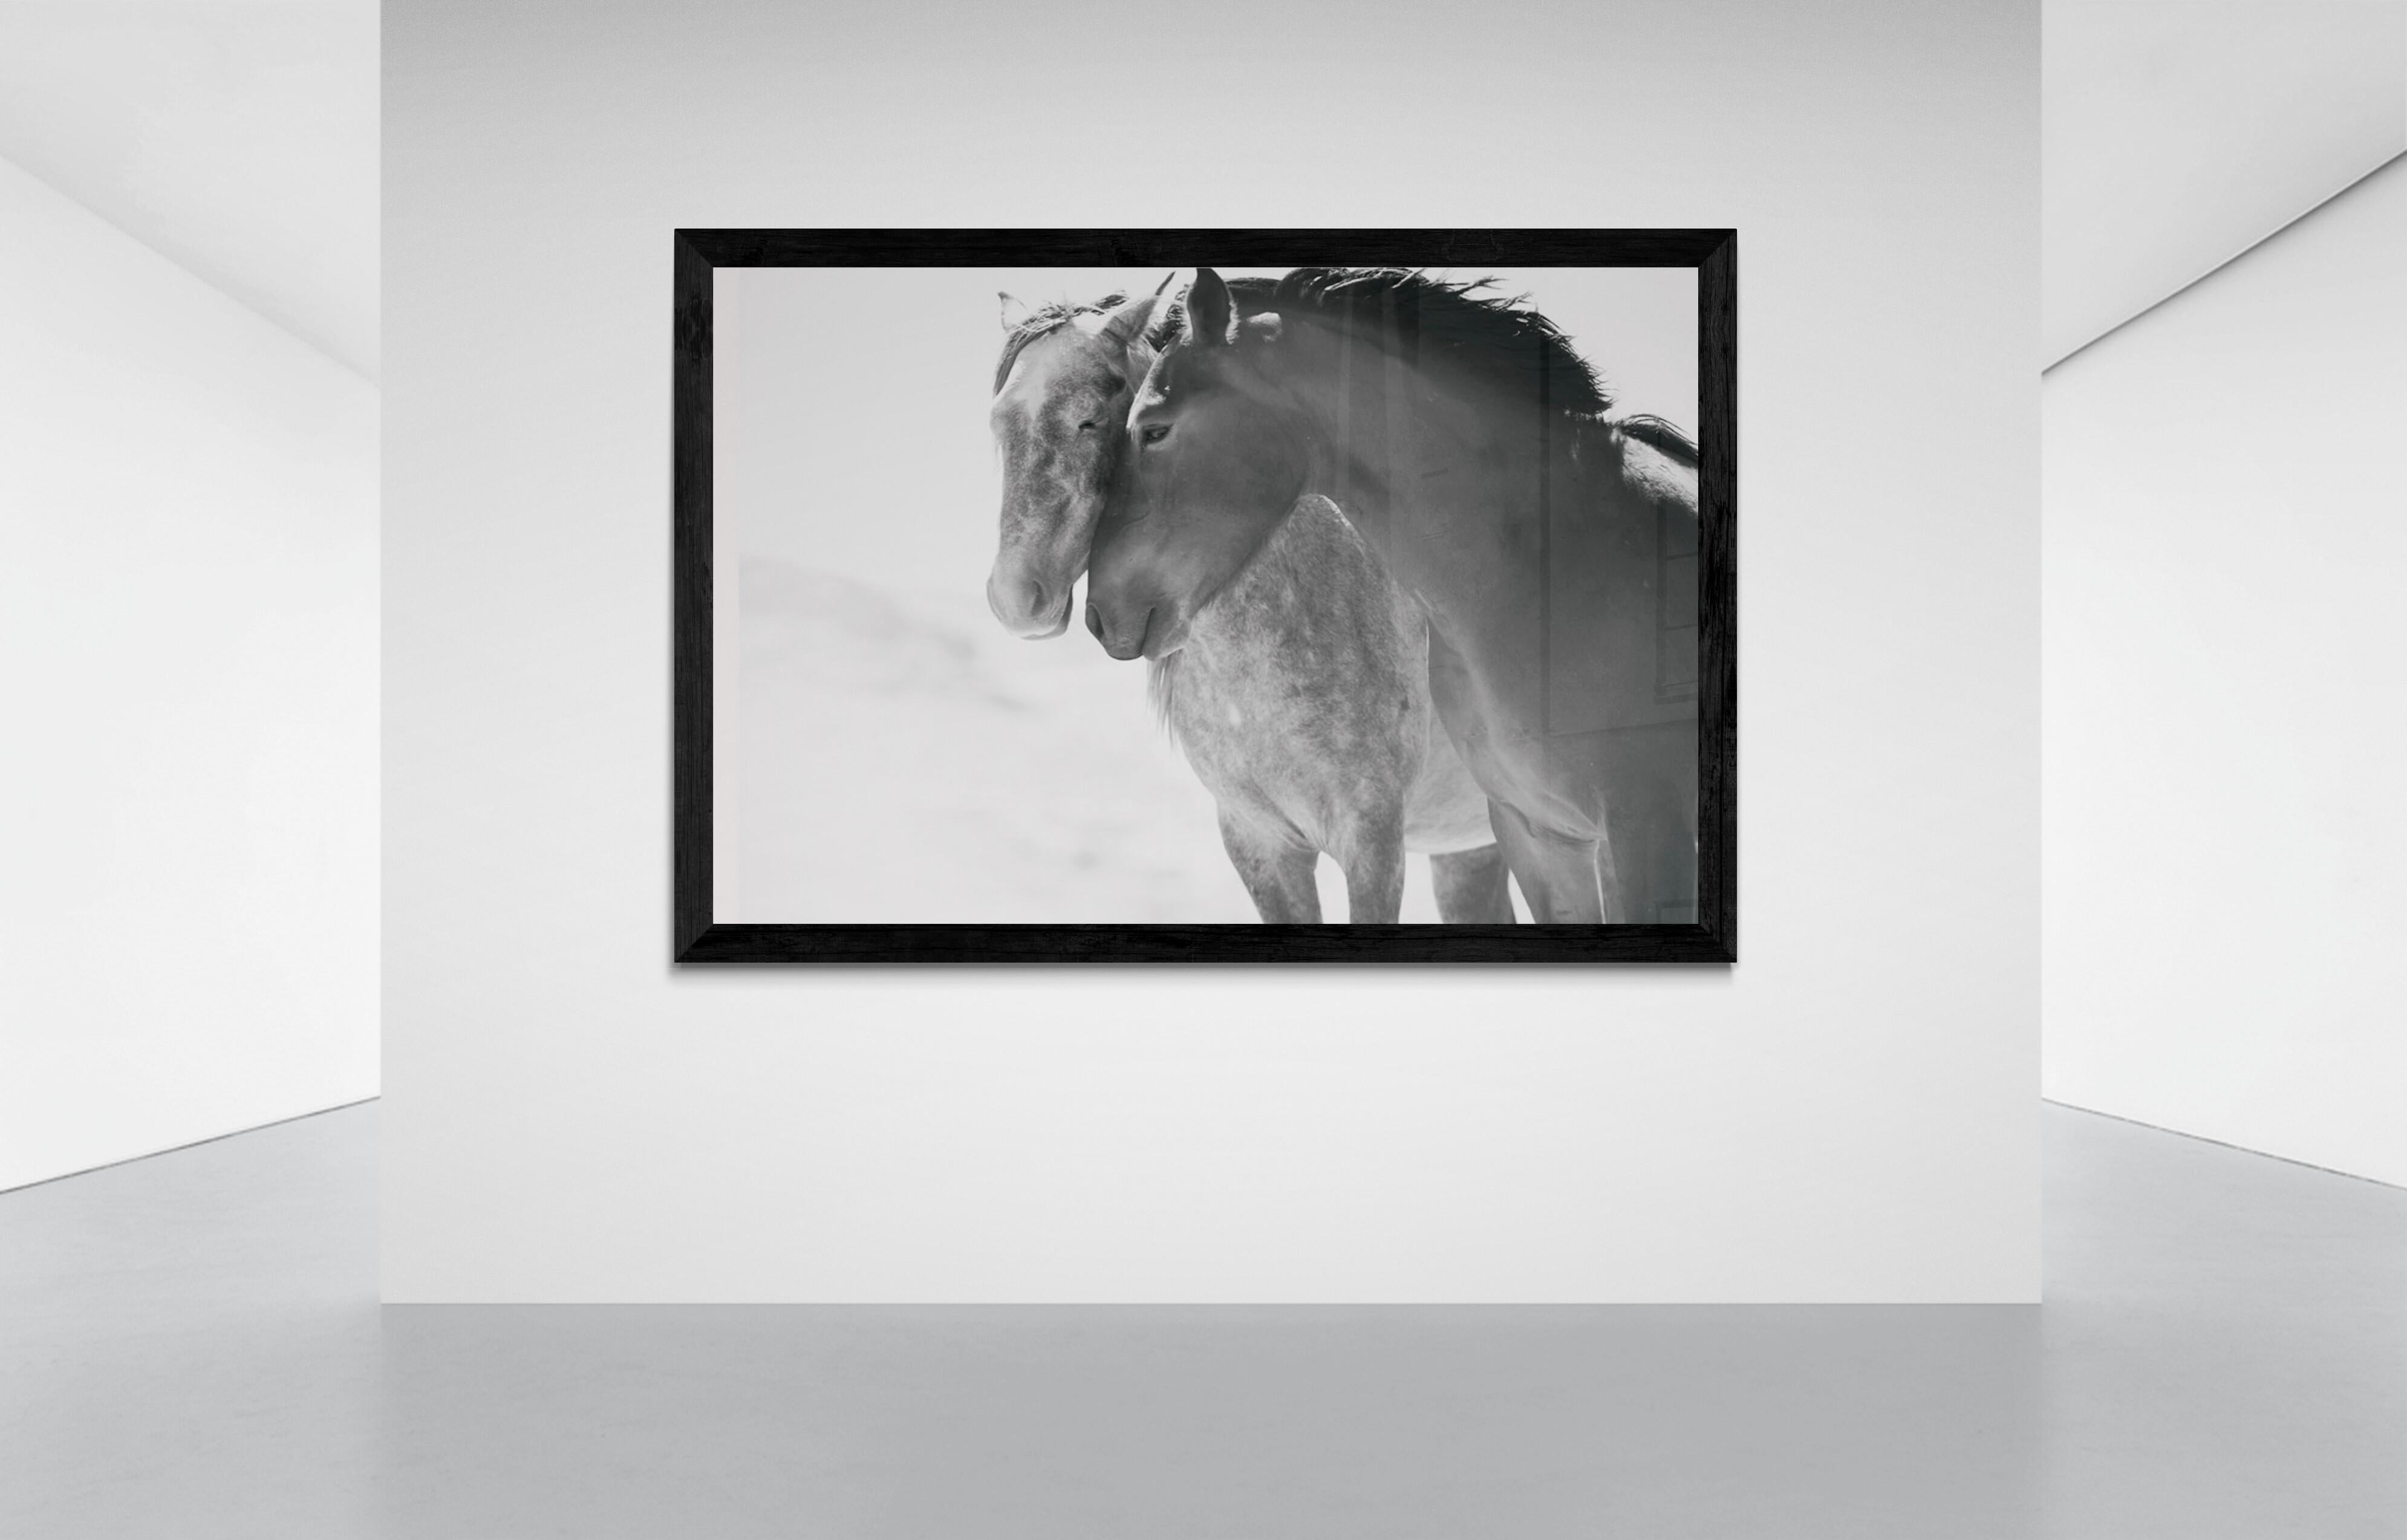  Black and White Photography of Wild Horses Mustangs Photograph 60x90  1